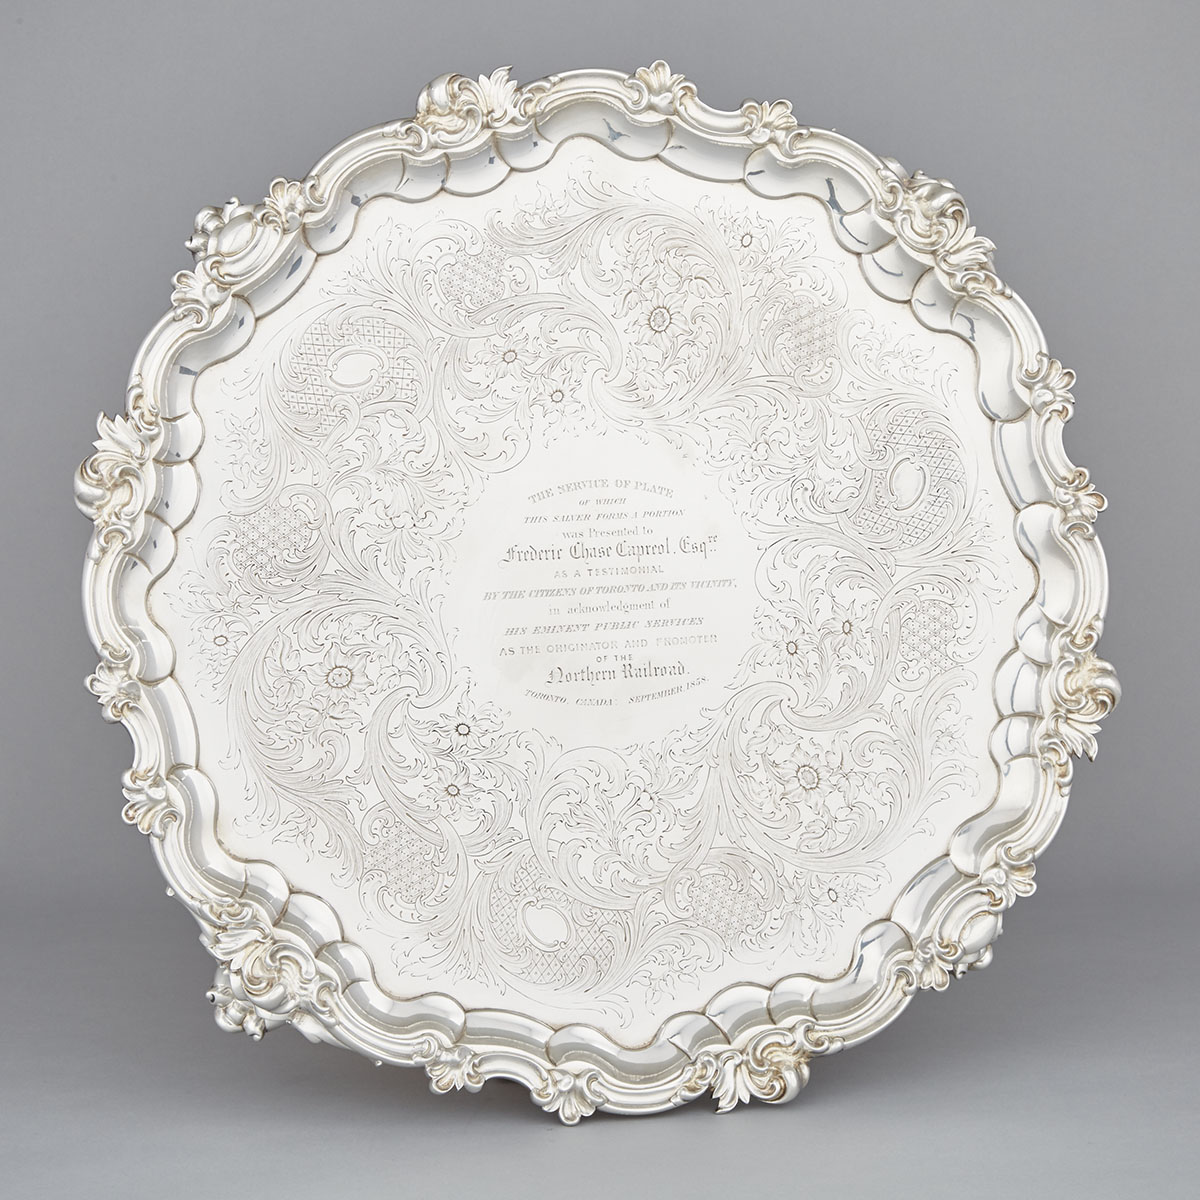 Victorian Silver Large Circular Salver, Charles Reilly & George Storer, London, 1845